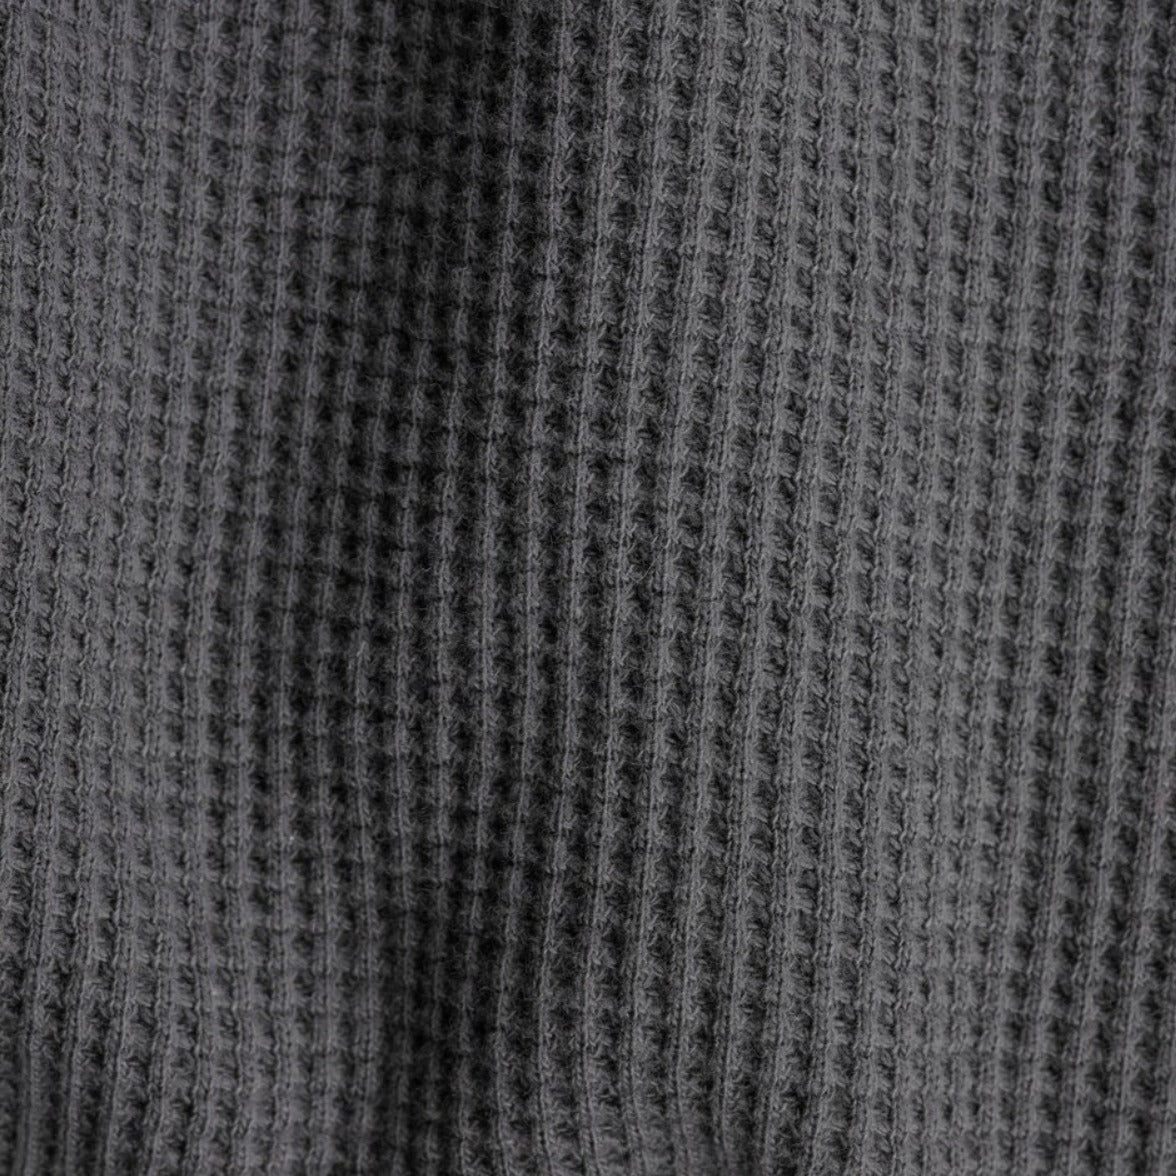 Thermal Knit Fabric 